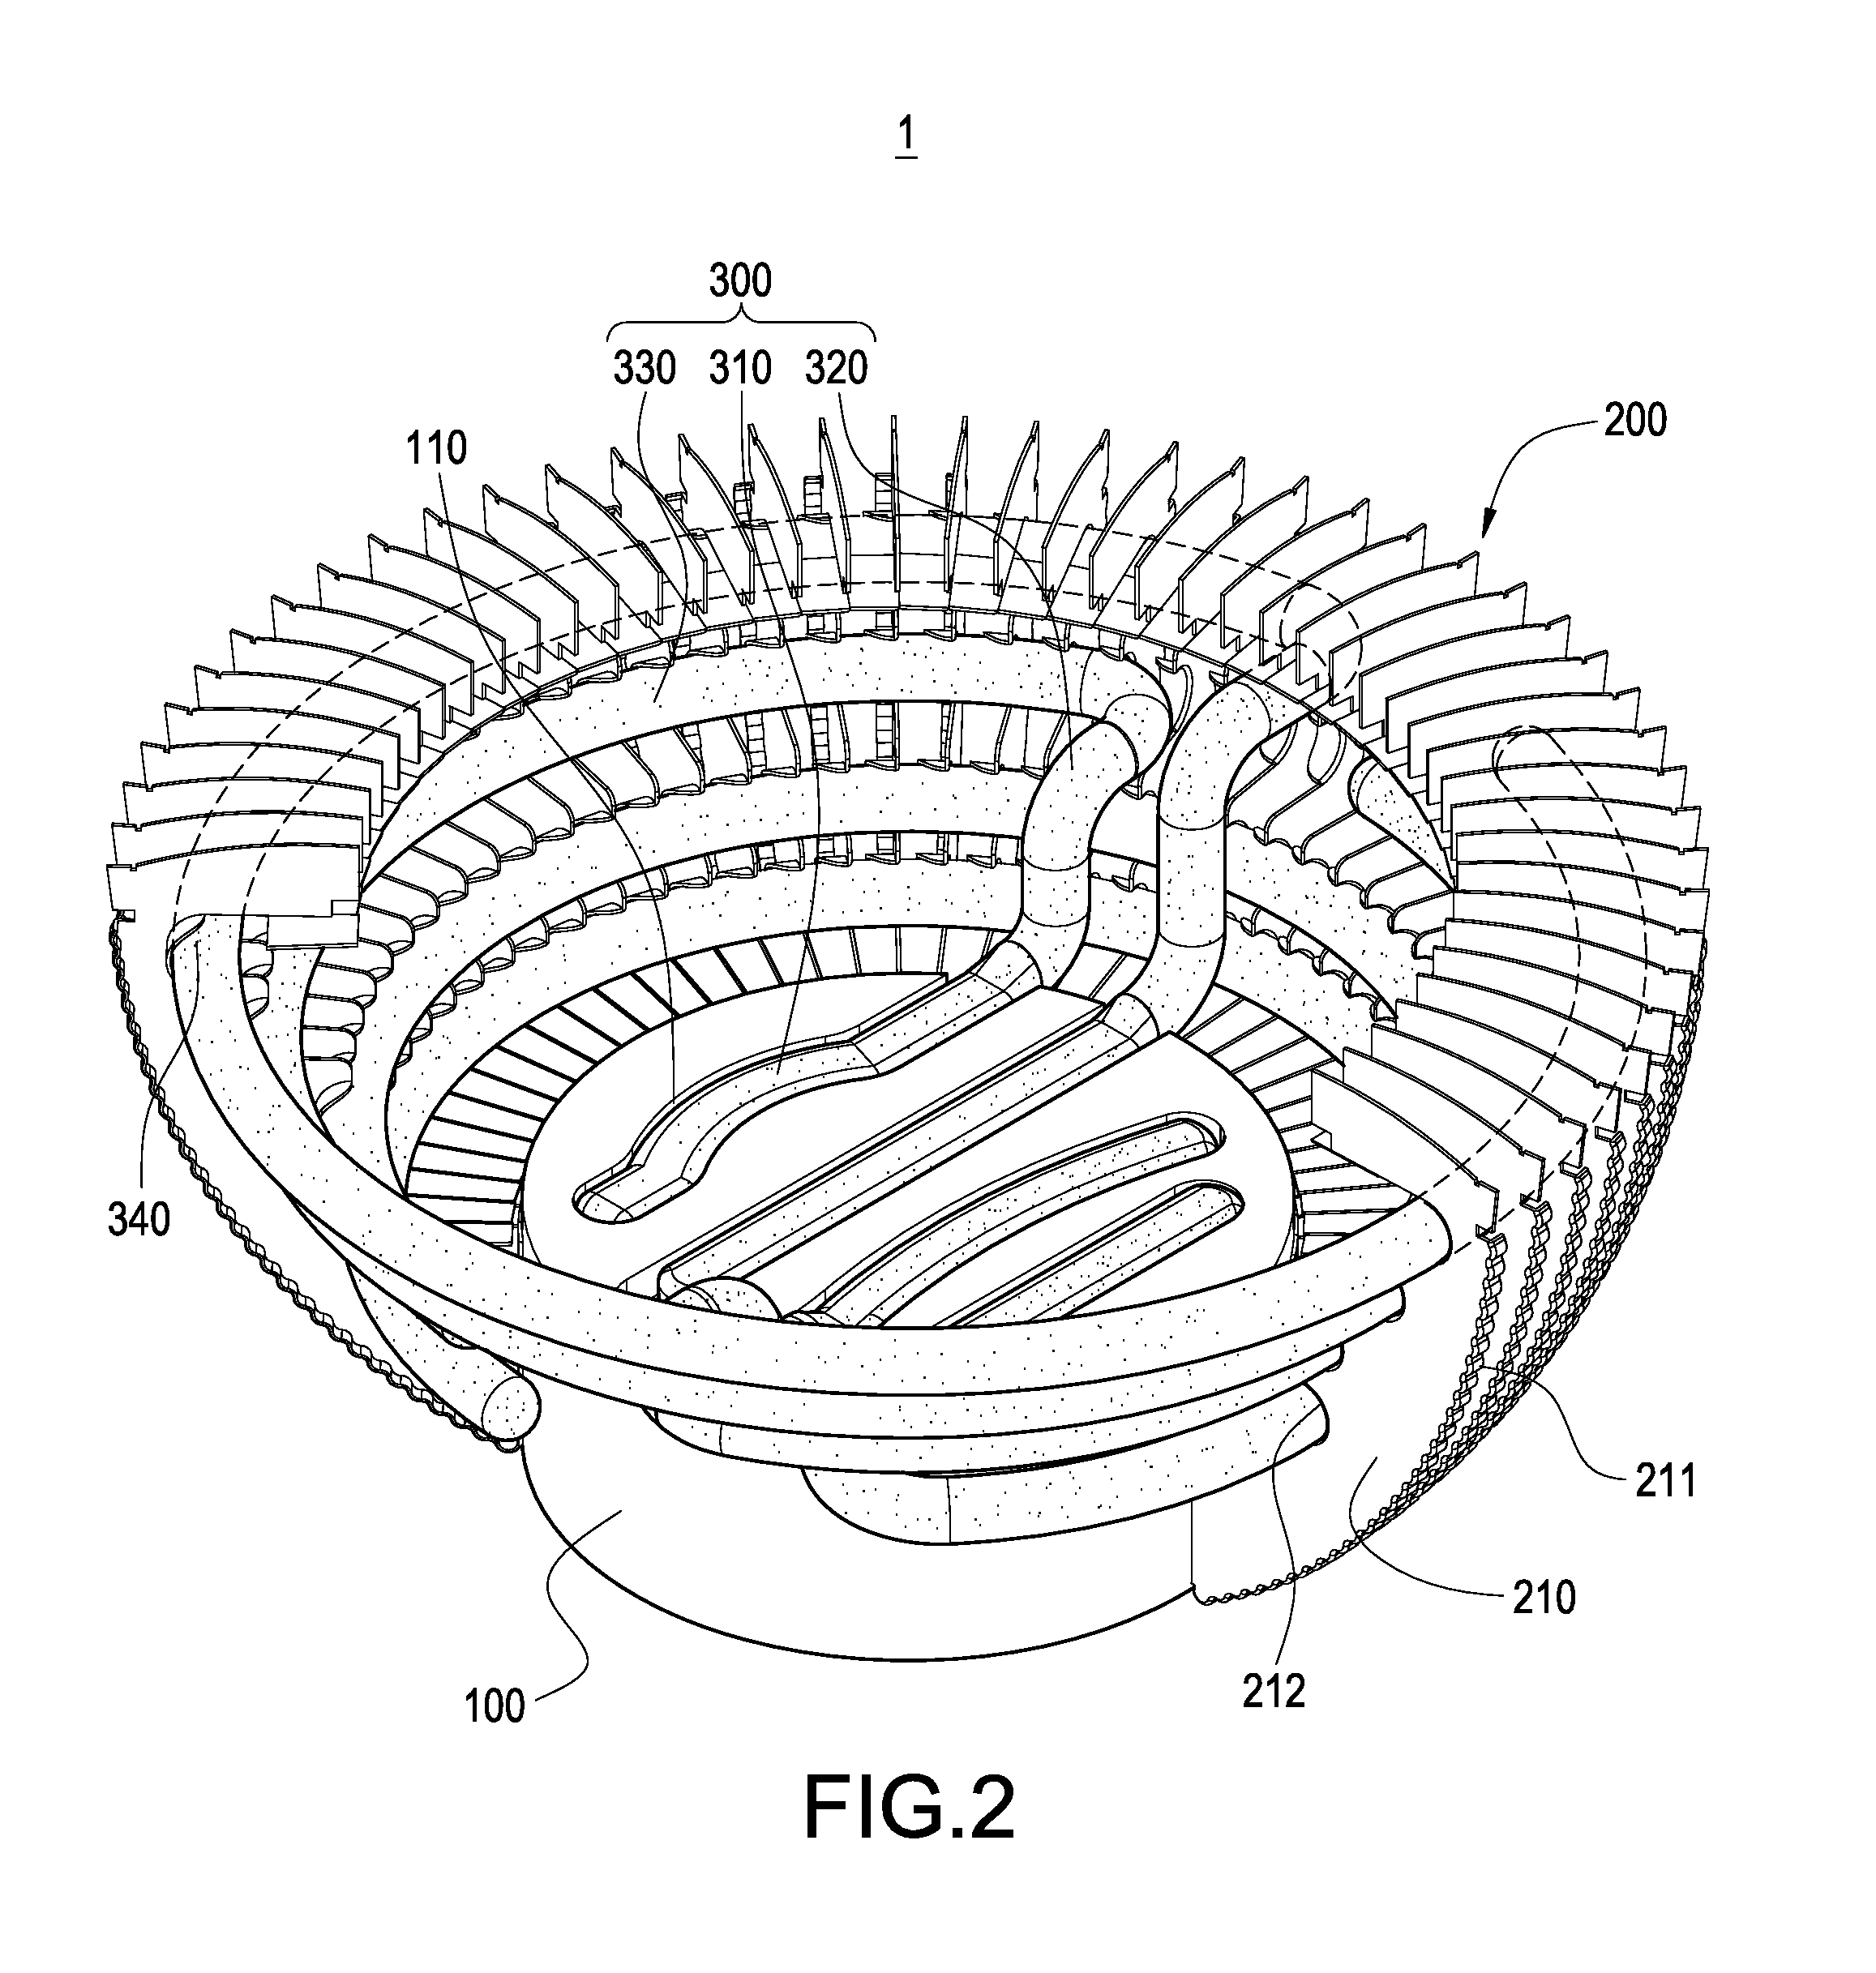 LED lamp and a heat sink thereof having a wound heat pipe